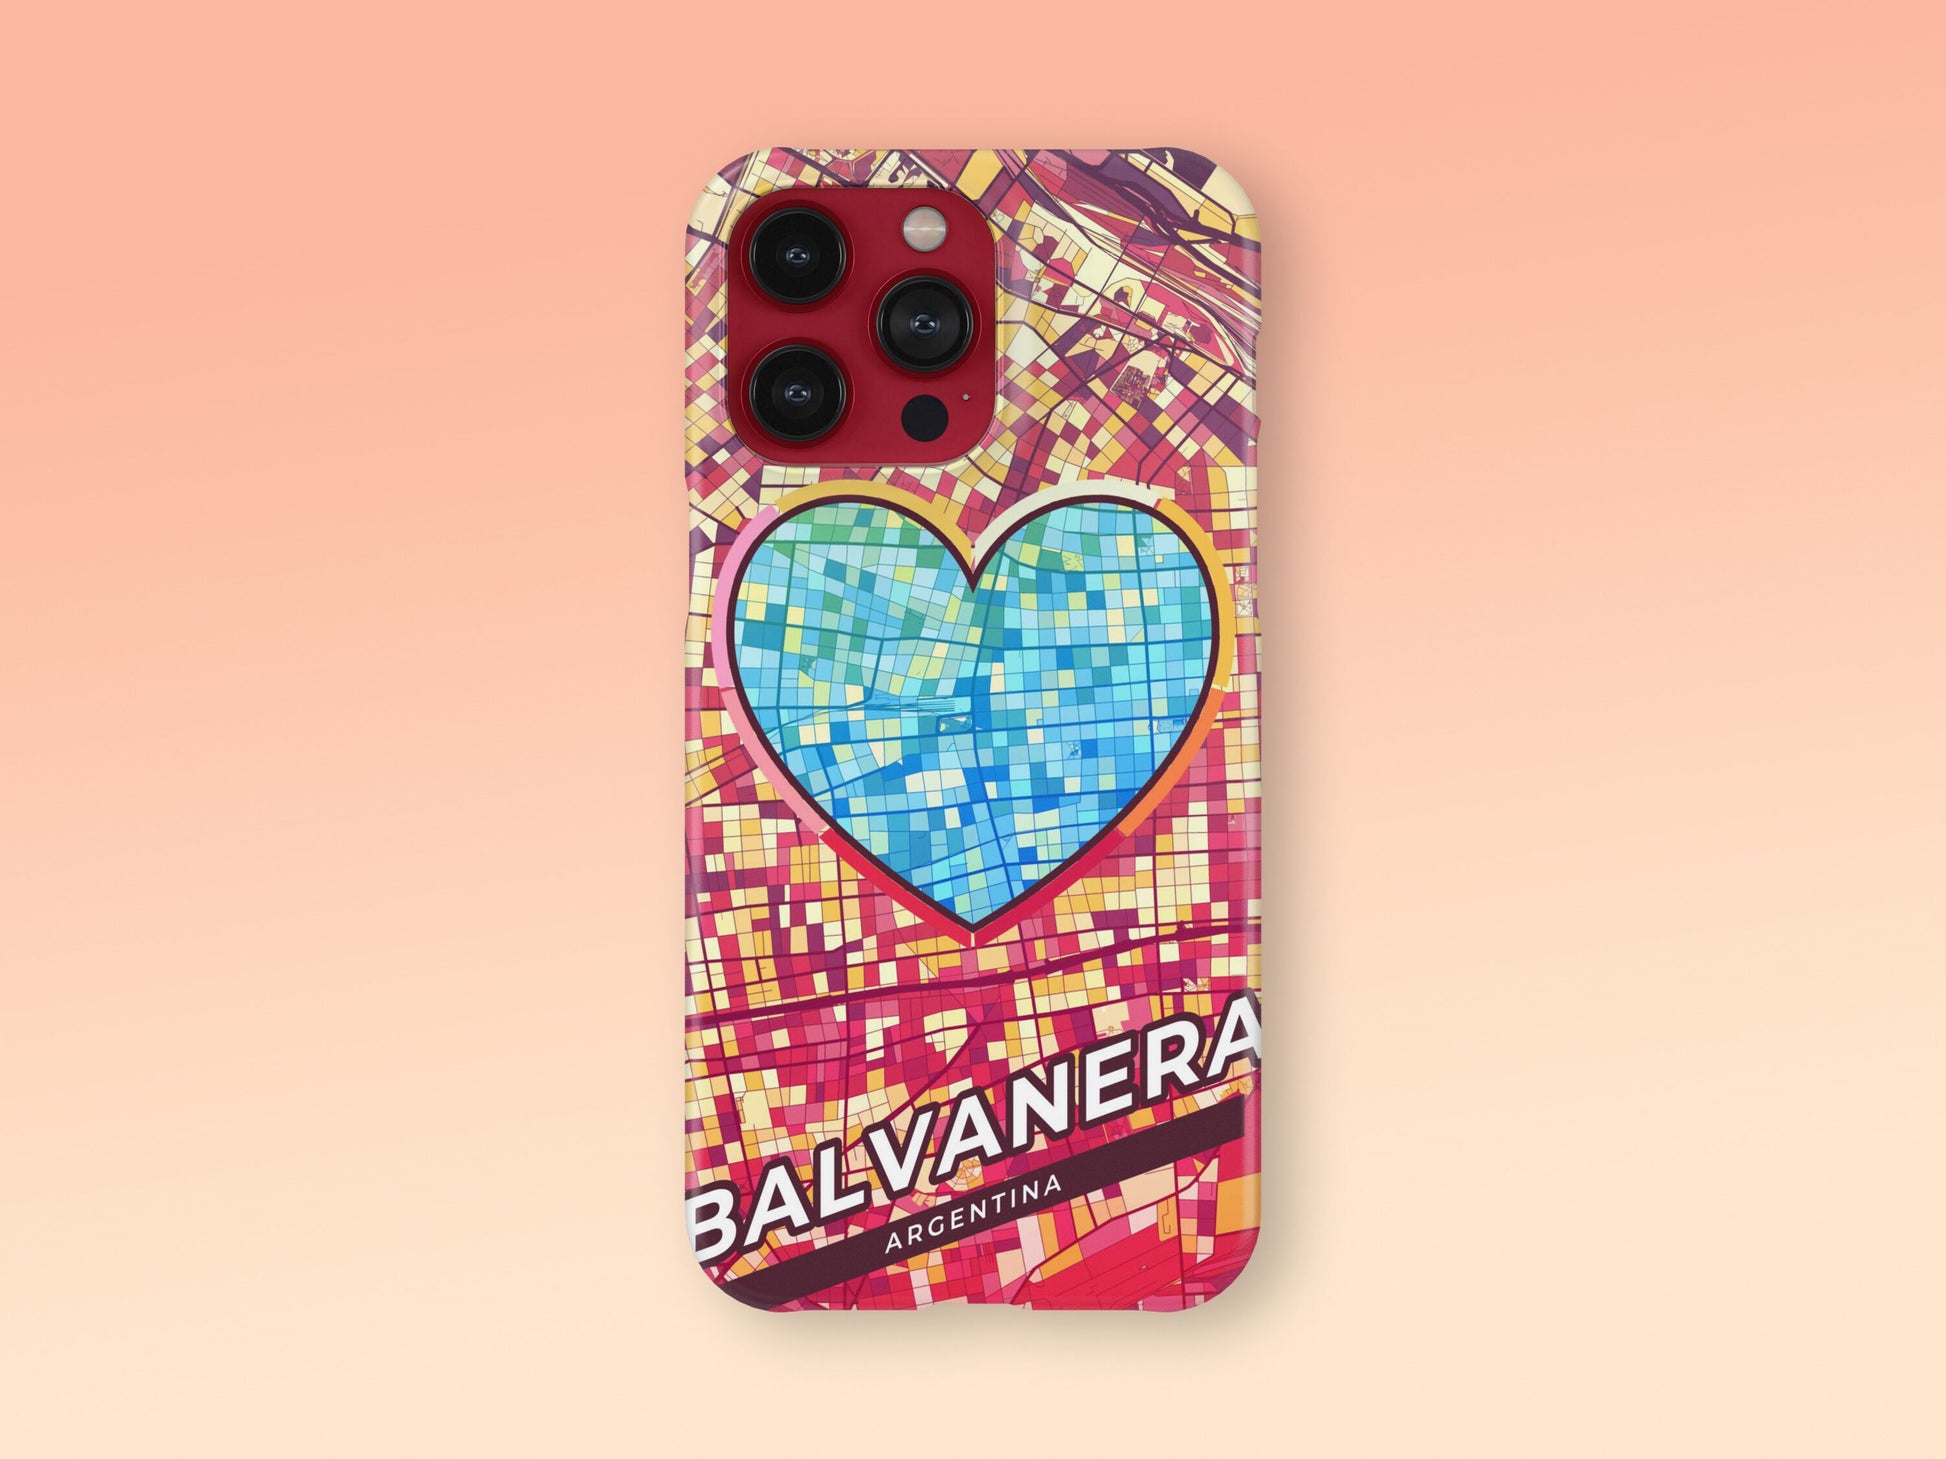 Balvanera Argentina slim phone case with colorful icon. Birthday, wedding or housewarming gift. Couple match cases. 2